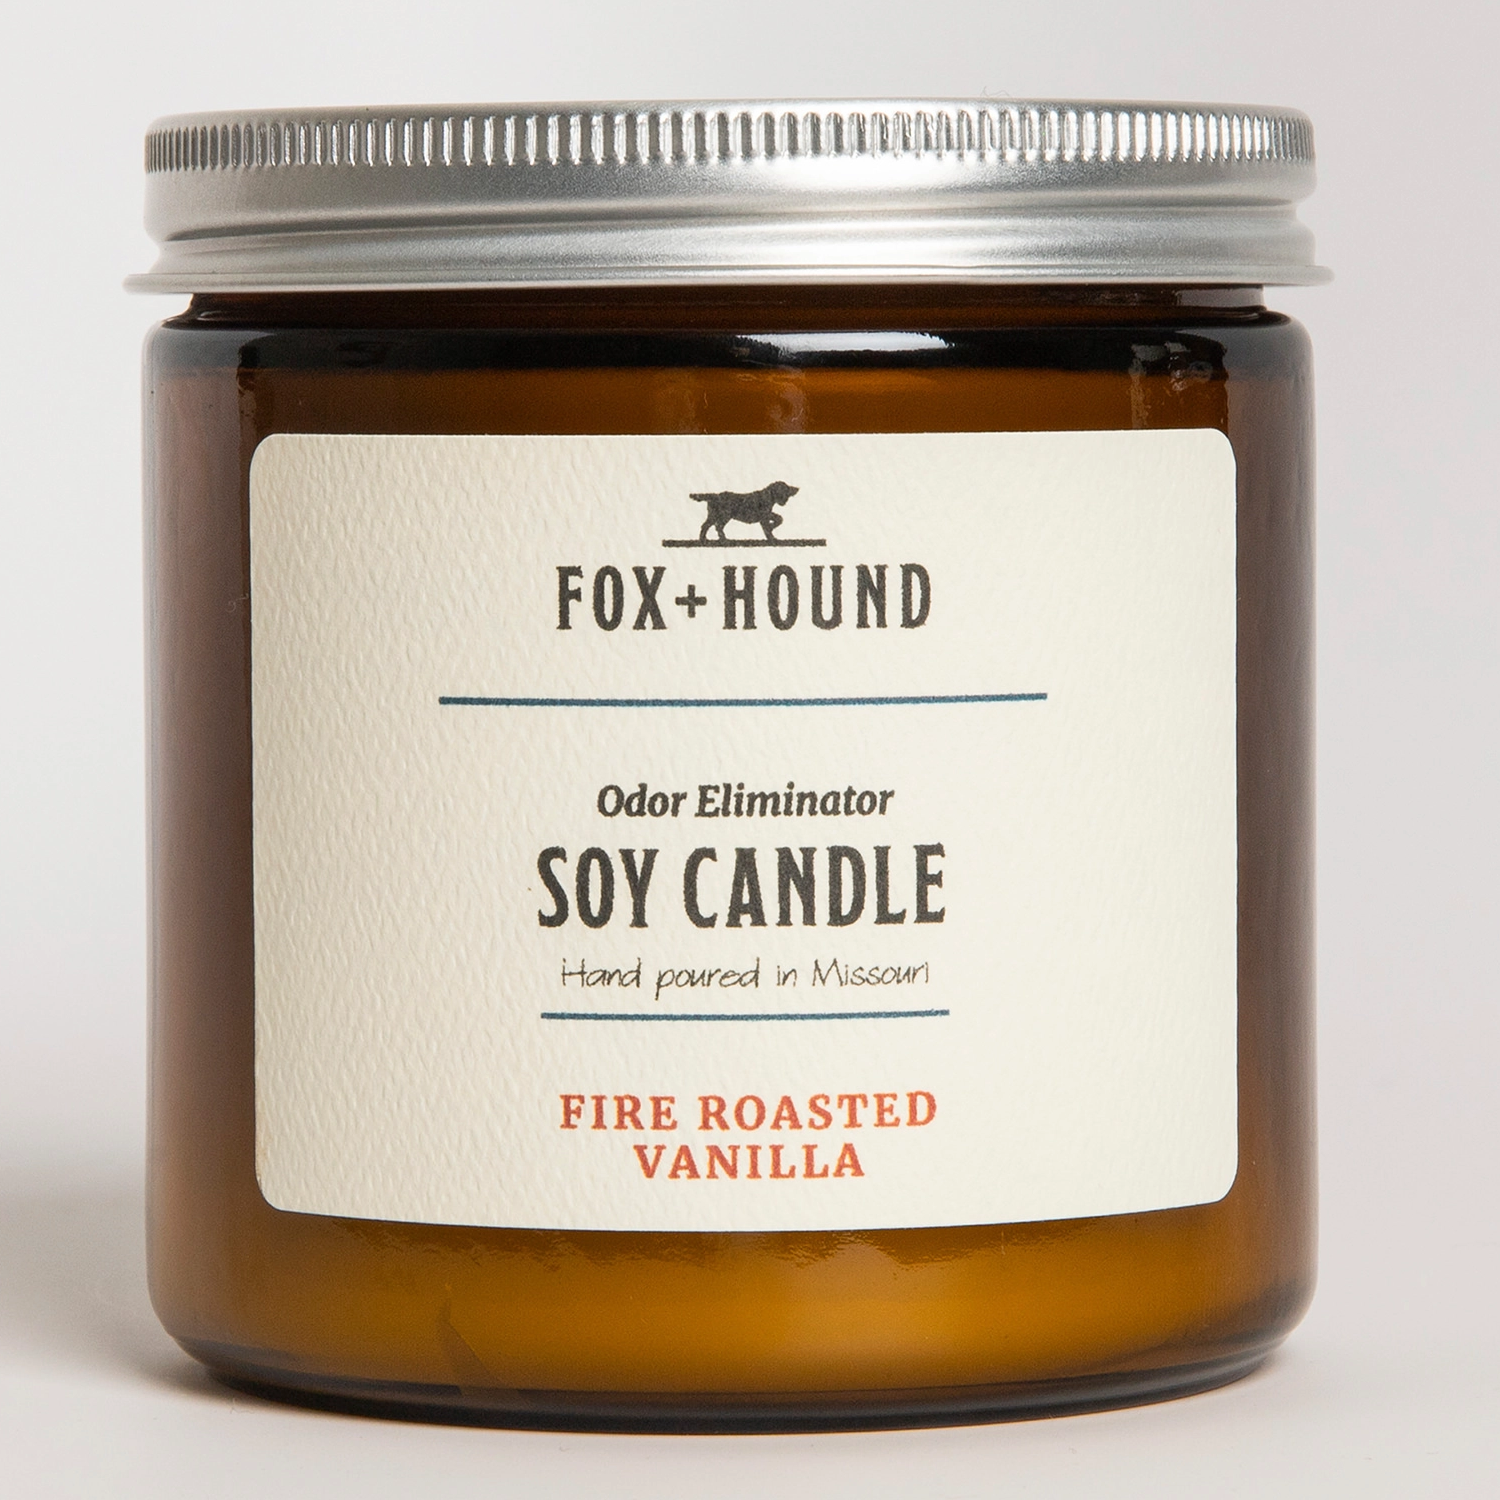 Pet Boutique - Dog Grooming - Bath and Body - Odor Eliminator Soy Candle: Fire Roasted Vanilla by Fox + Hound